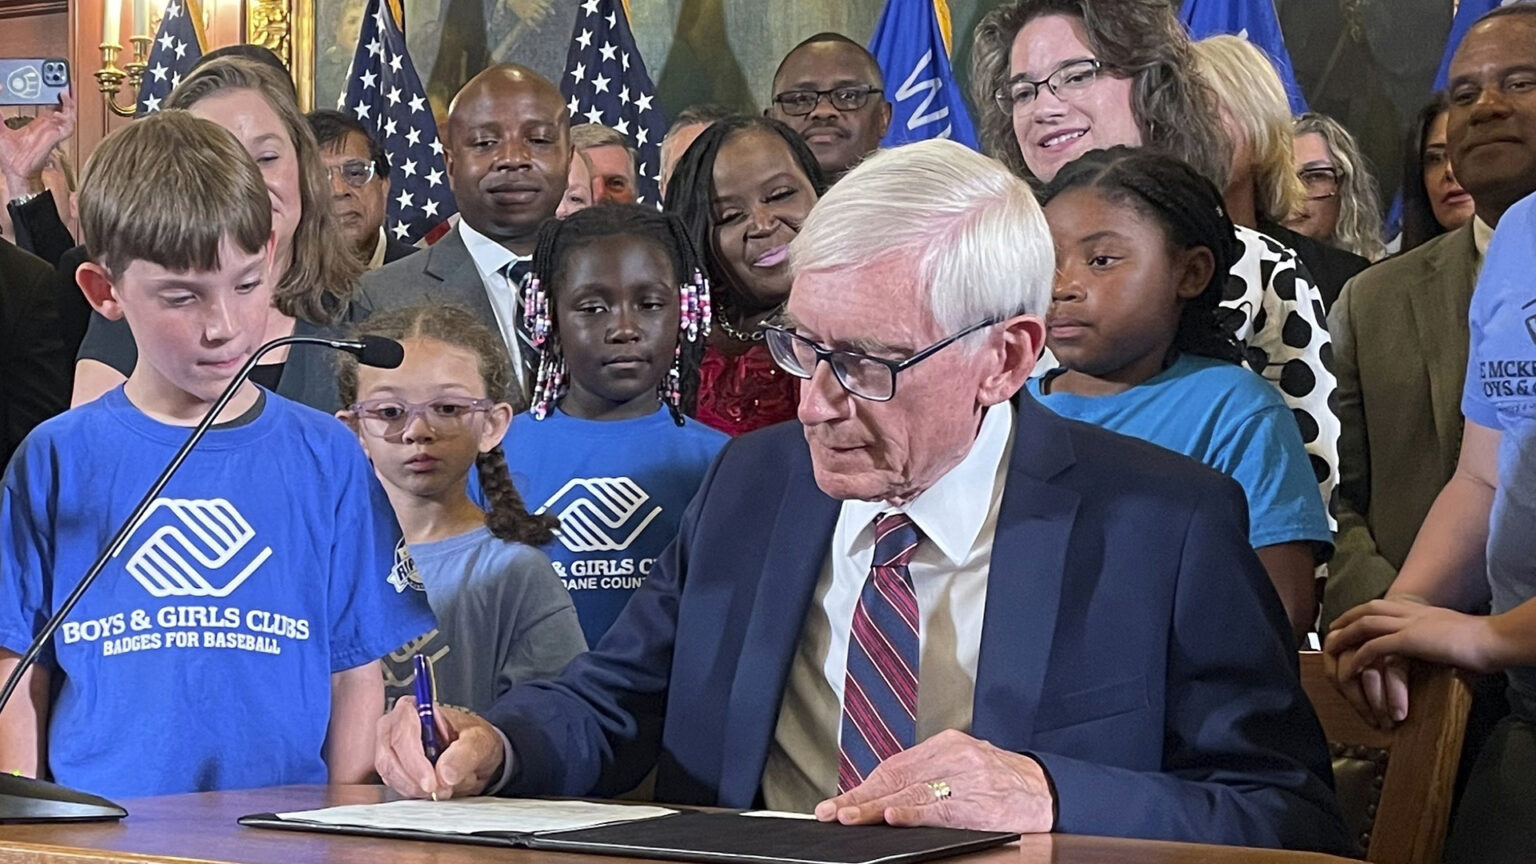 Tony Evers sits at a small wood table and uses a pen to sign a document in a folder, with children and adults standing beside and behind him in a room with a row of U.S. and Wisconsin flags, electric wall sconces, paintings, and filigree gilded wall decorations.